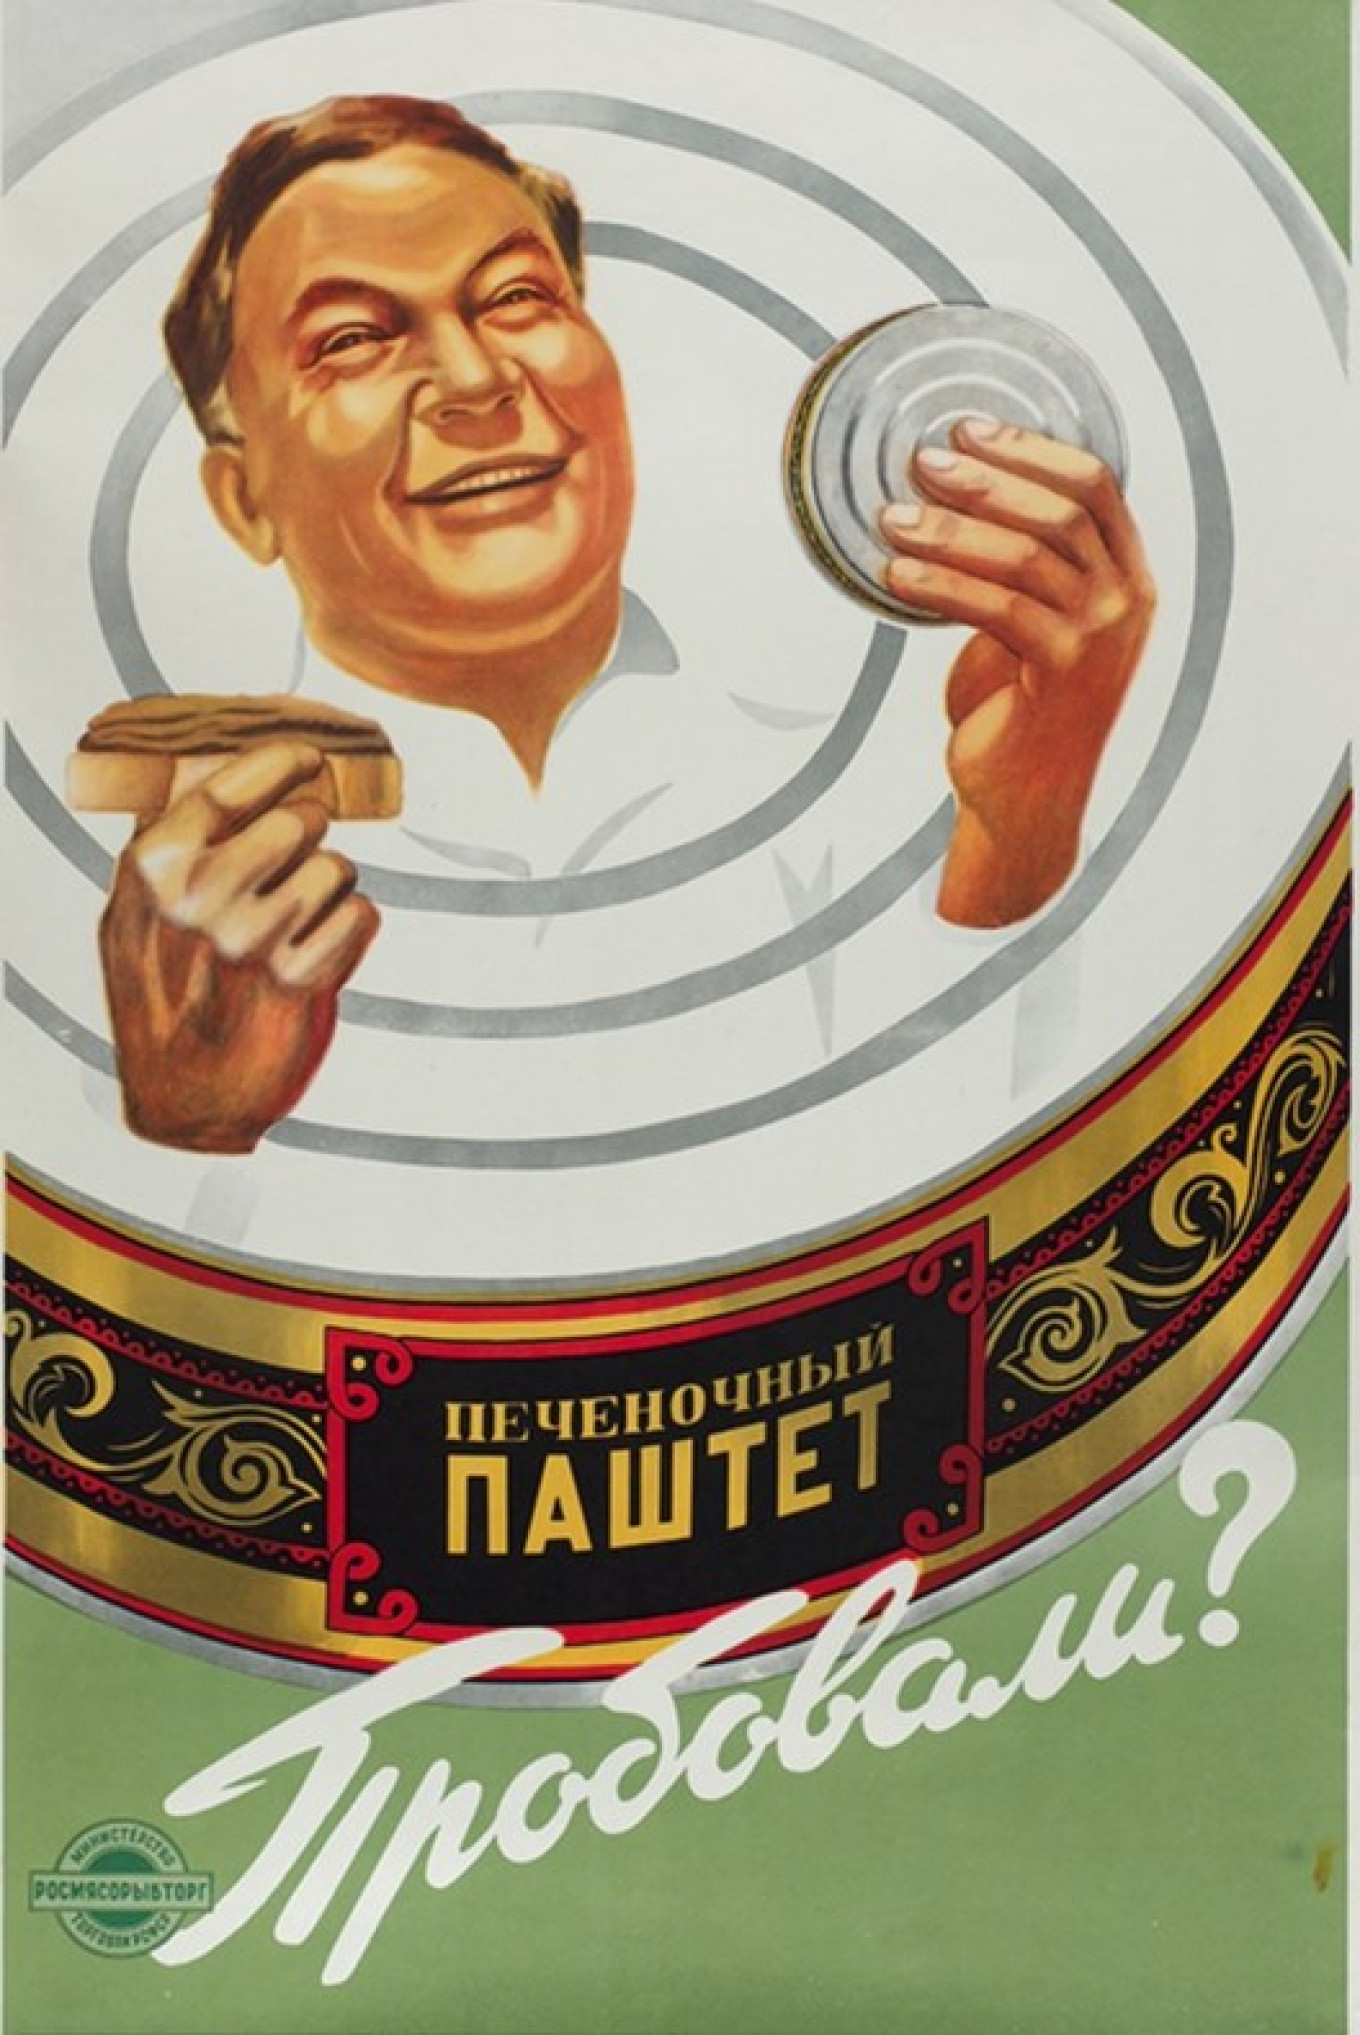 
					 "Liver pâté. Have you tasted it?" (Soviet advertising poster from 1959)					 									